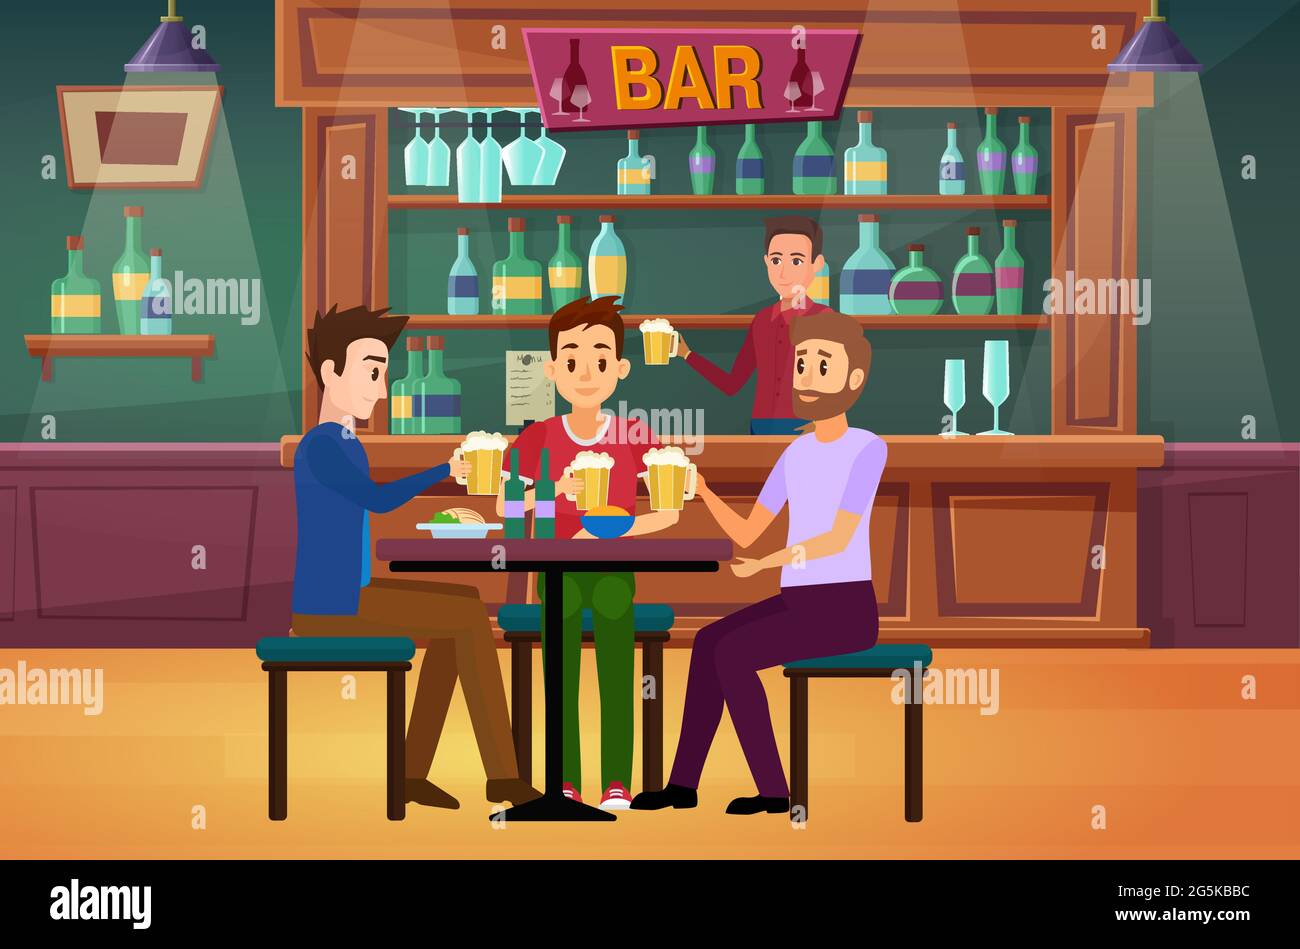 People friends drink beer in bar or pub vector illustration. Cartoon happy young man characters holding beer glasses, guys drinking, having fun, barman behind counter in restaurant interior background Stock Vector